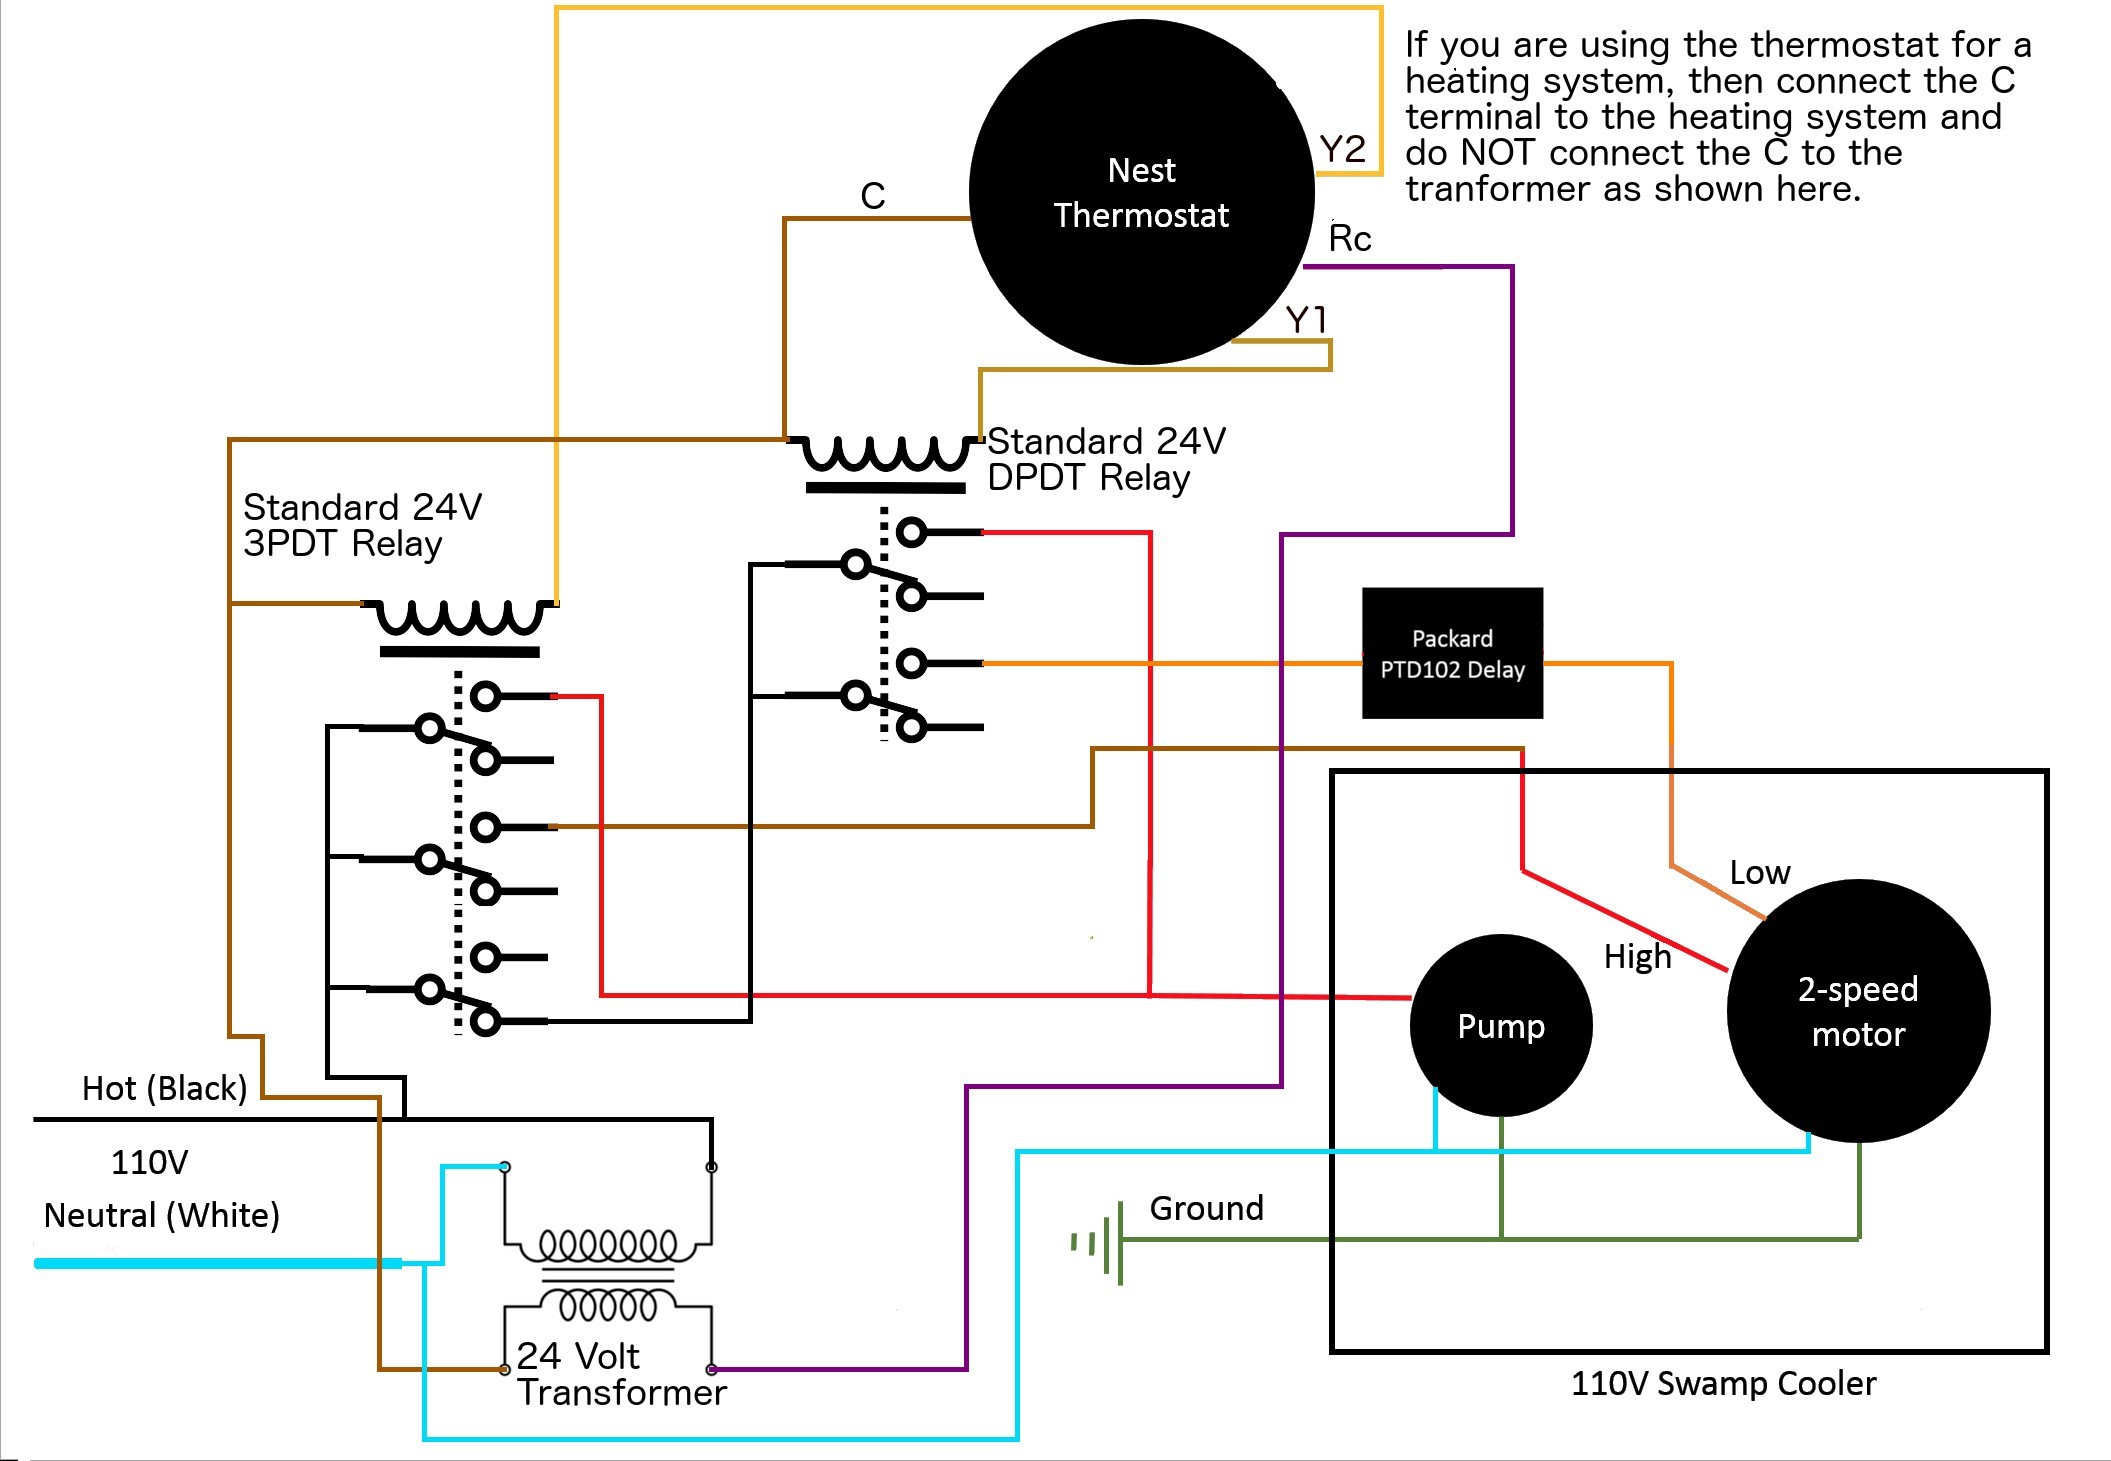 Wiring Diagram Motor Control System Valid Wiring Controlling 110v